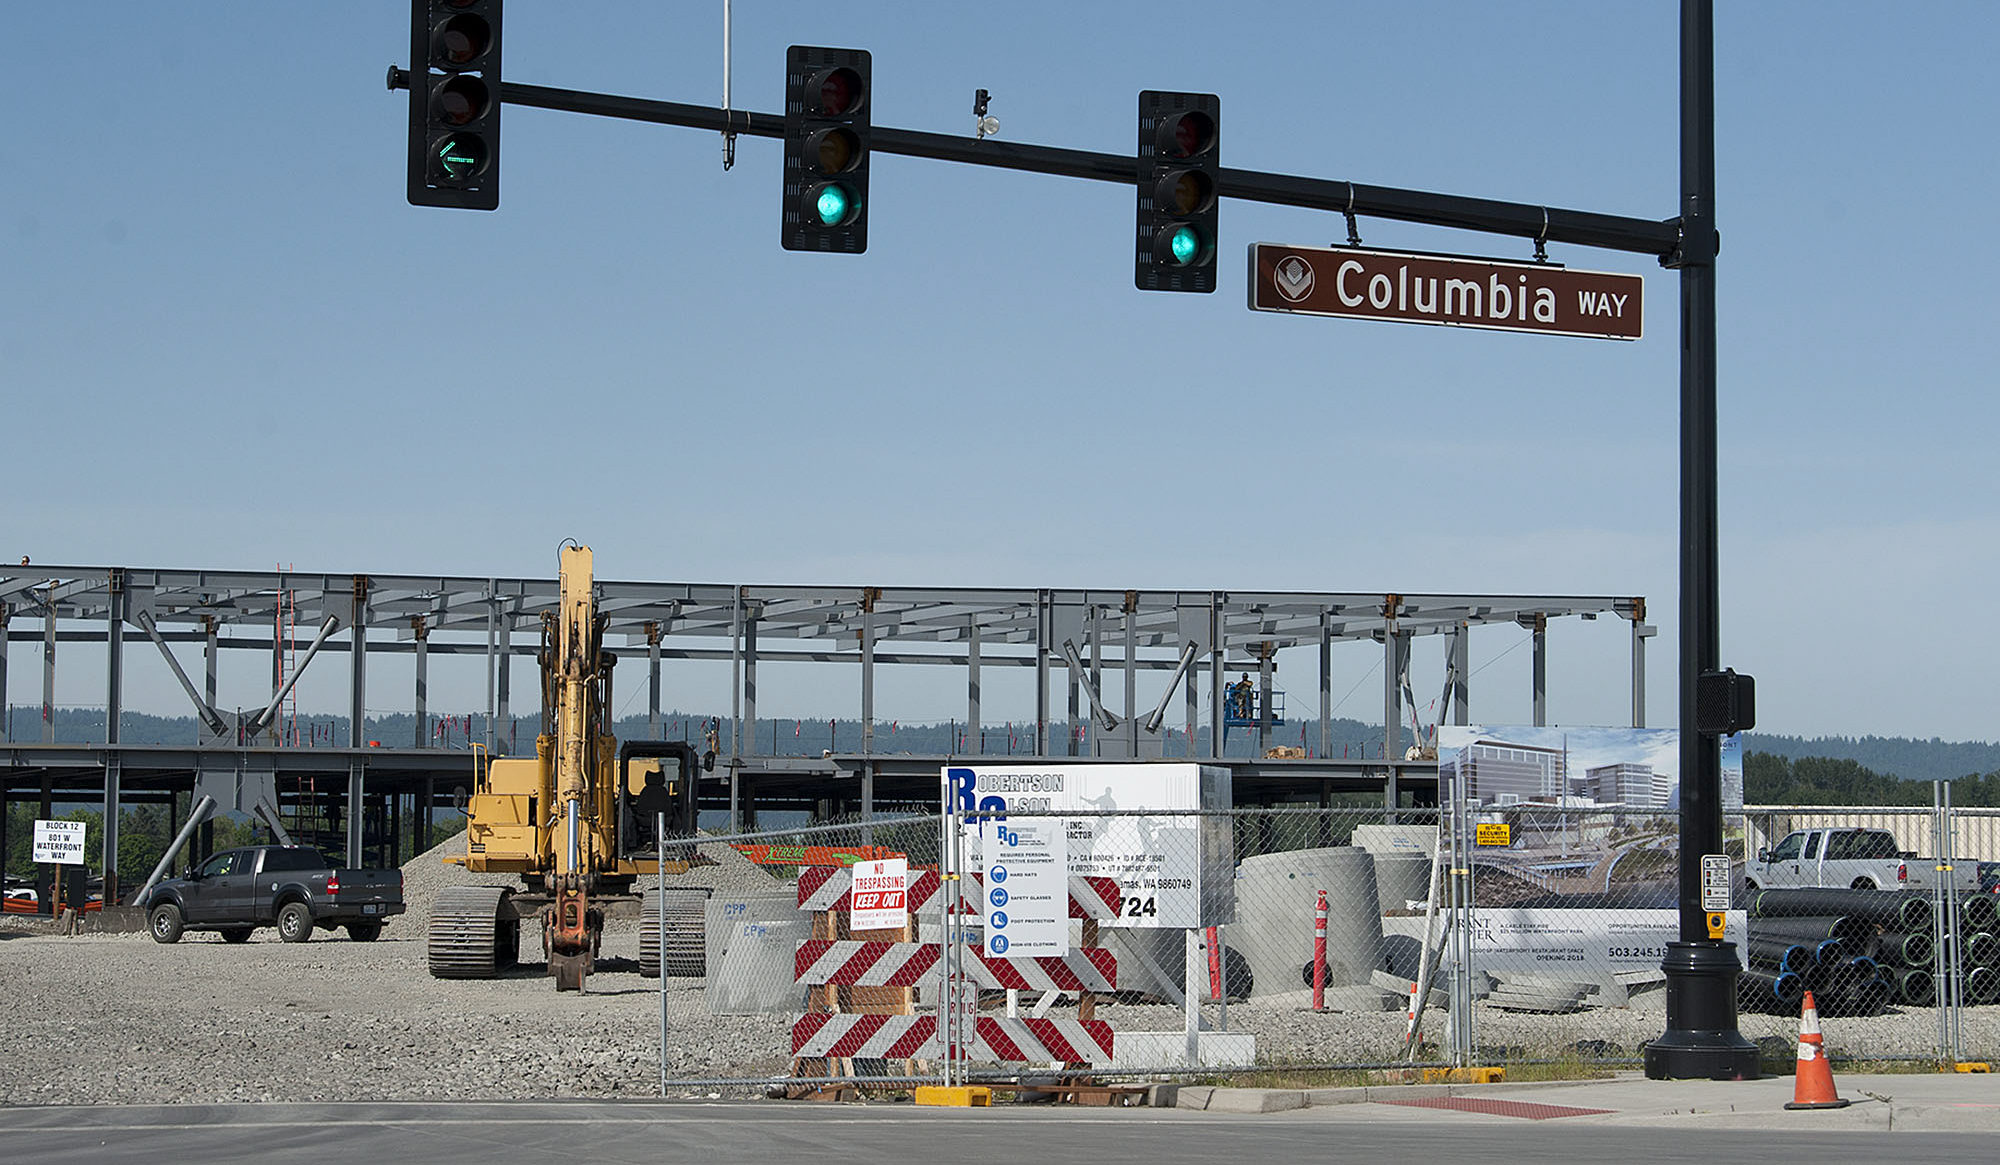 Construction at the Vancouver Waterfront continues at the intersection of Columbia Way and Grant Street on Tuesday morning, June 6, 2017.